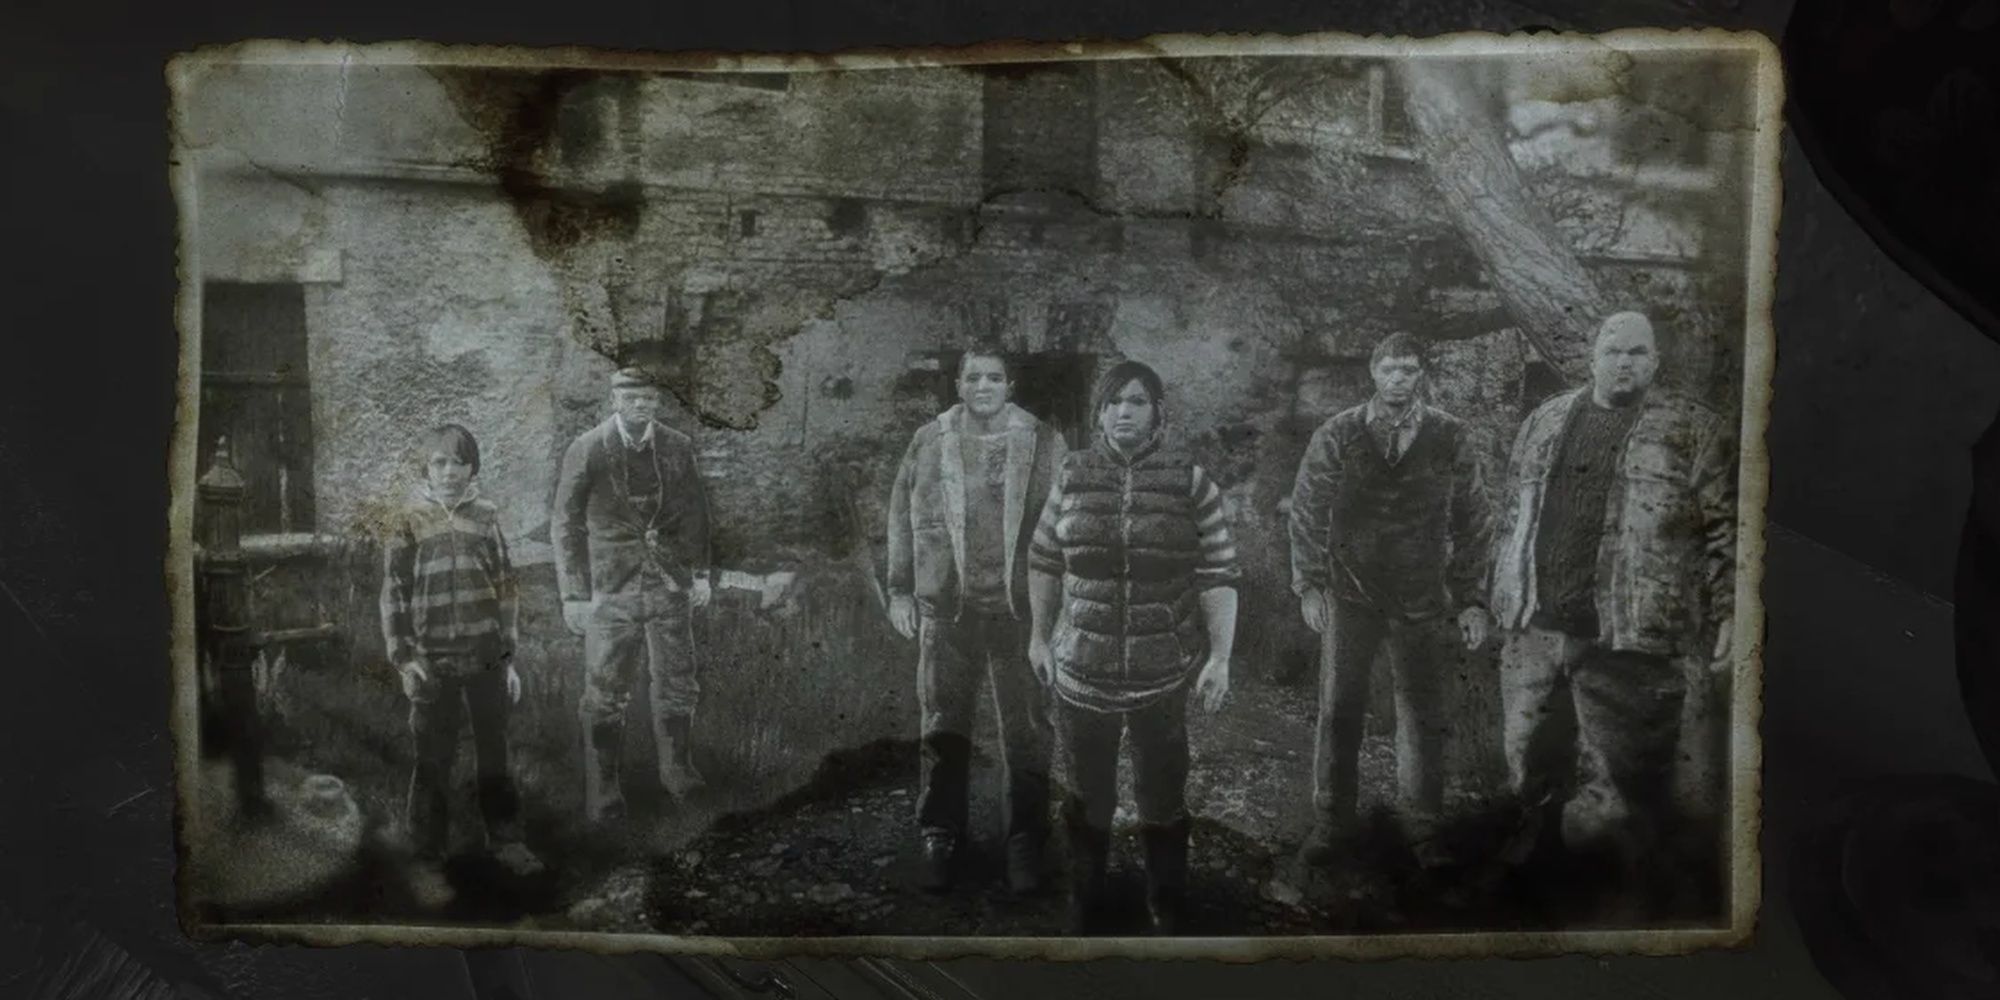 The Vanishing Of Ethan Carter: An Old Photograph Of Ethans Family